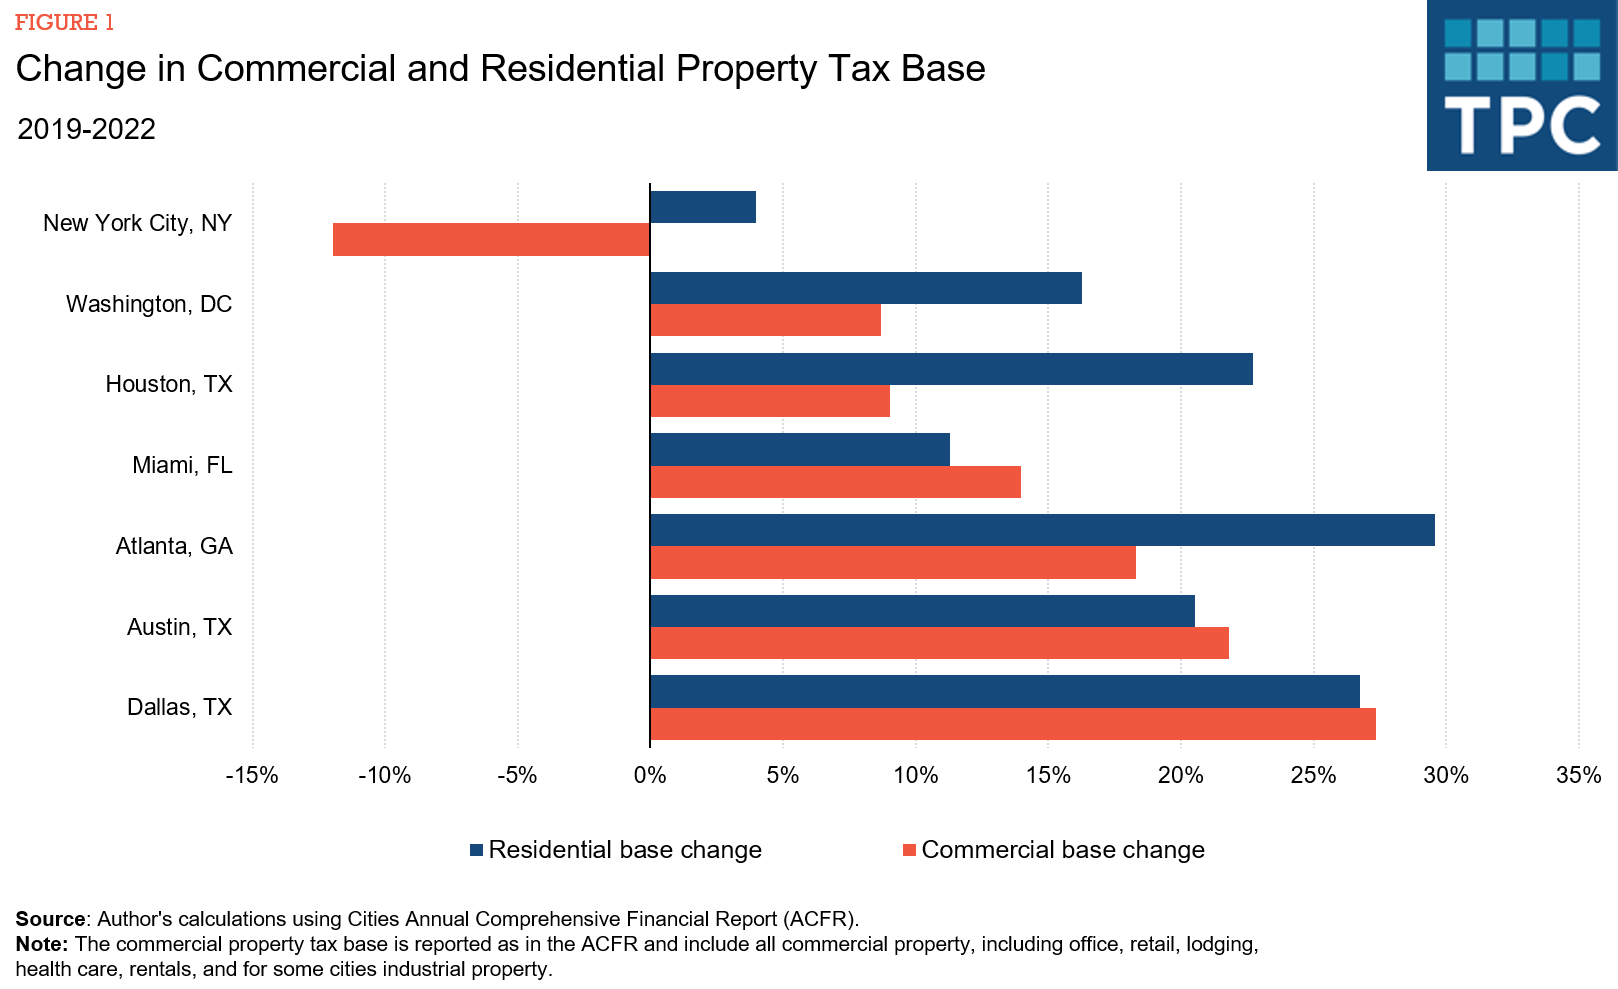 chart showing the change in commercial versus residential property taxes among seven major cities: New York, DC, Houston, Miami, Atlanta, Austin and Dallas. New York saw it's commercial tax base drop by more than 10%.